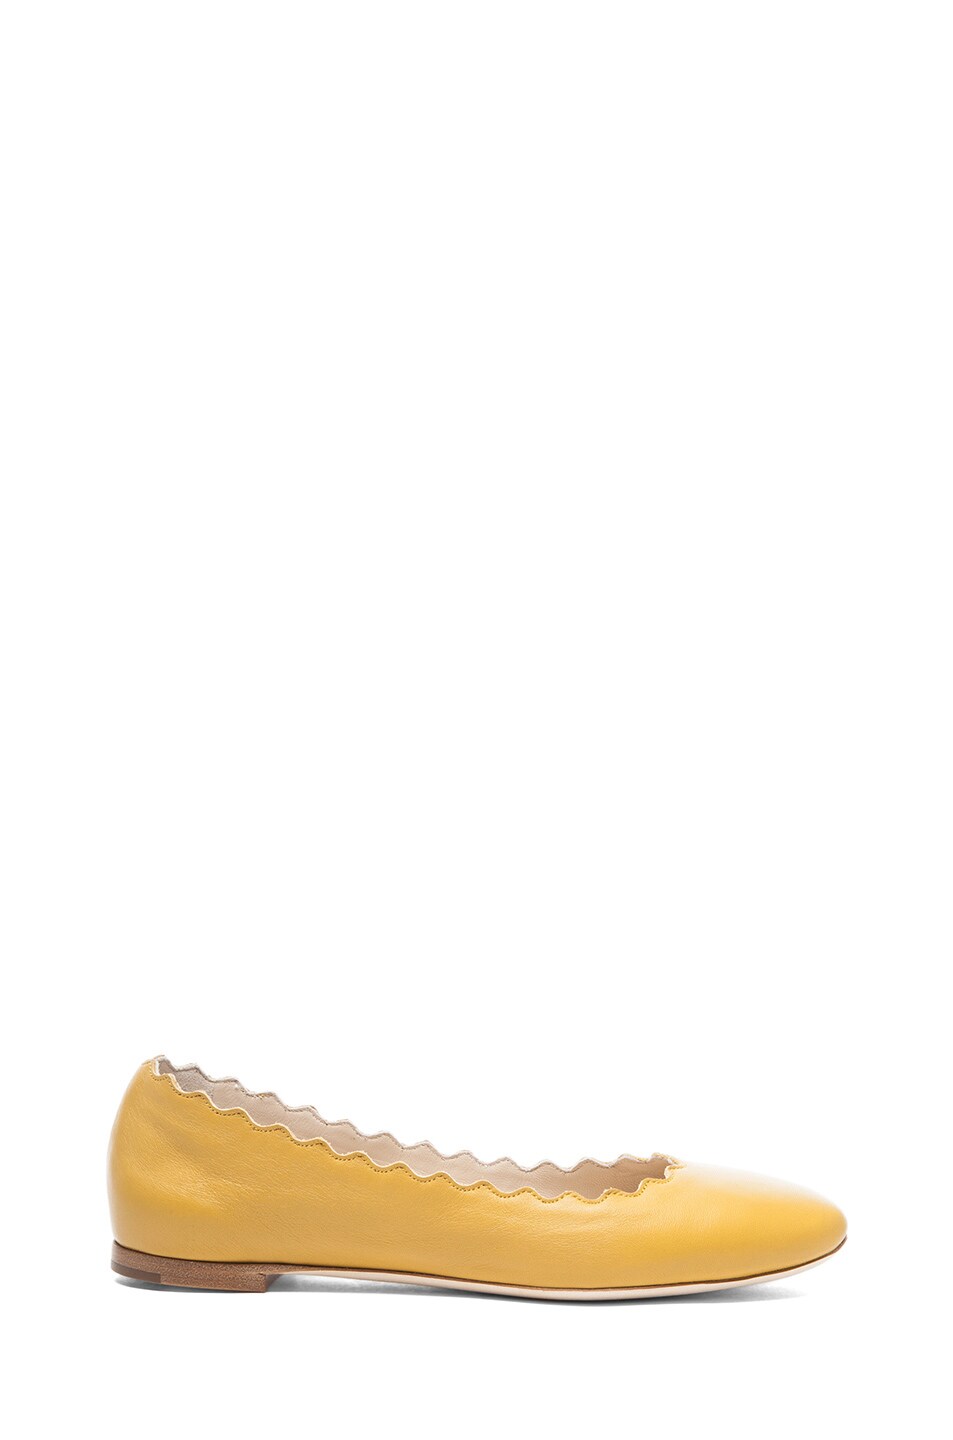 Image 1 of Chloe Leather Scalloped Flats in Light Sand